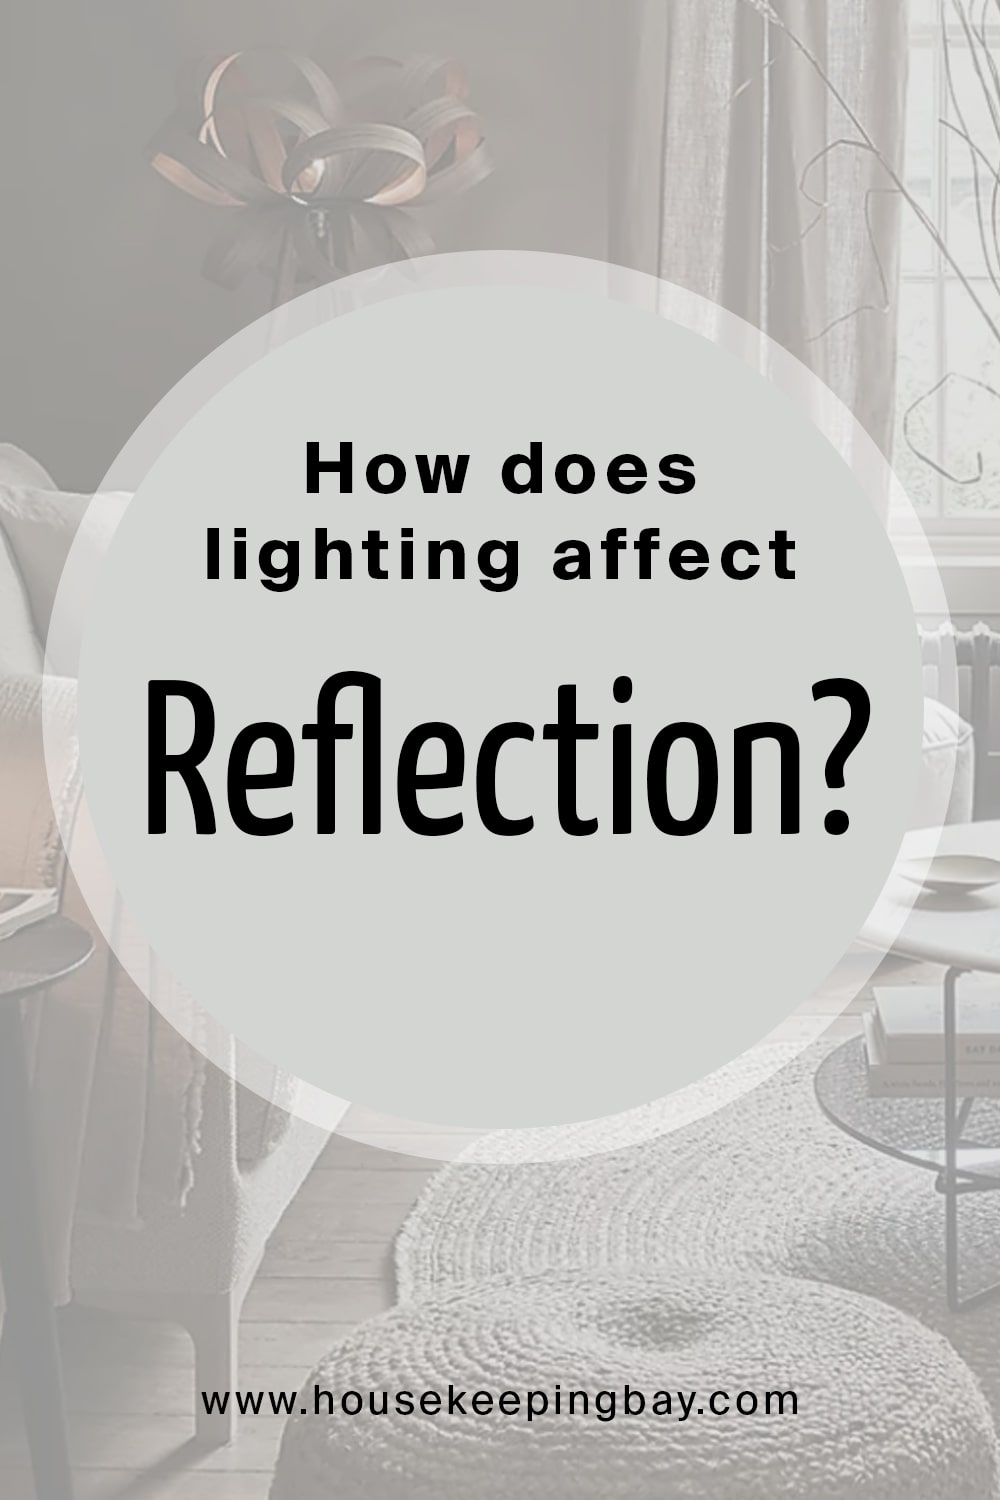 How does lighting affect Reflection